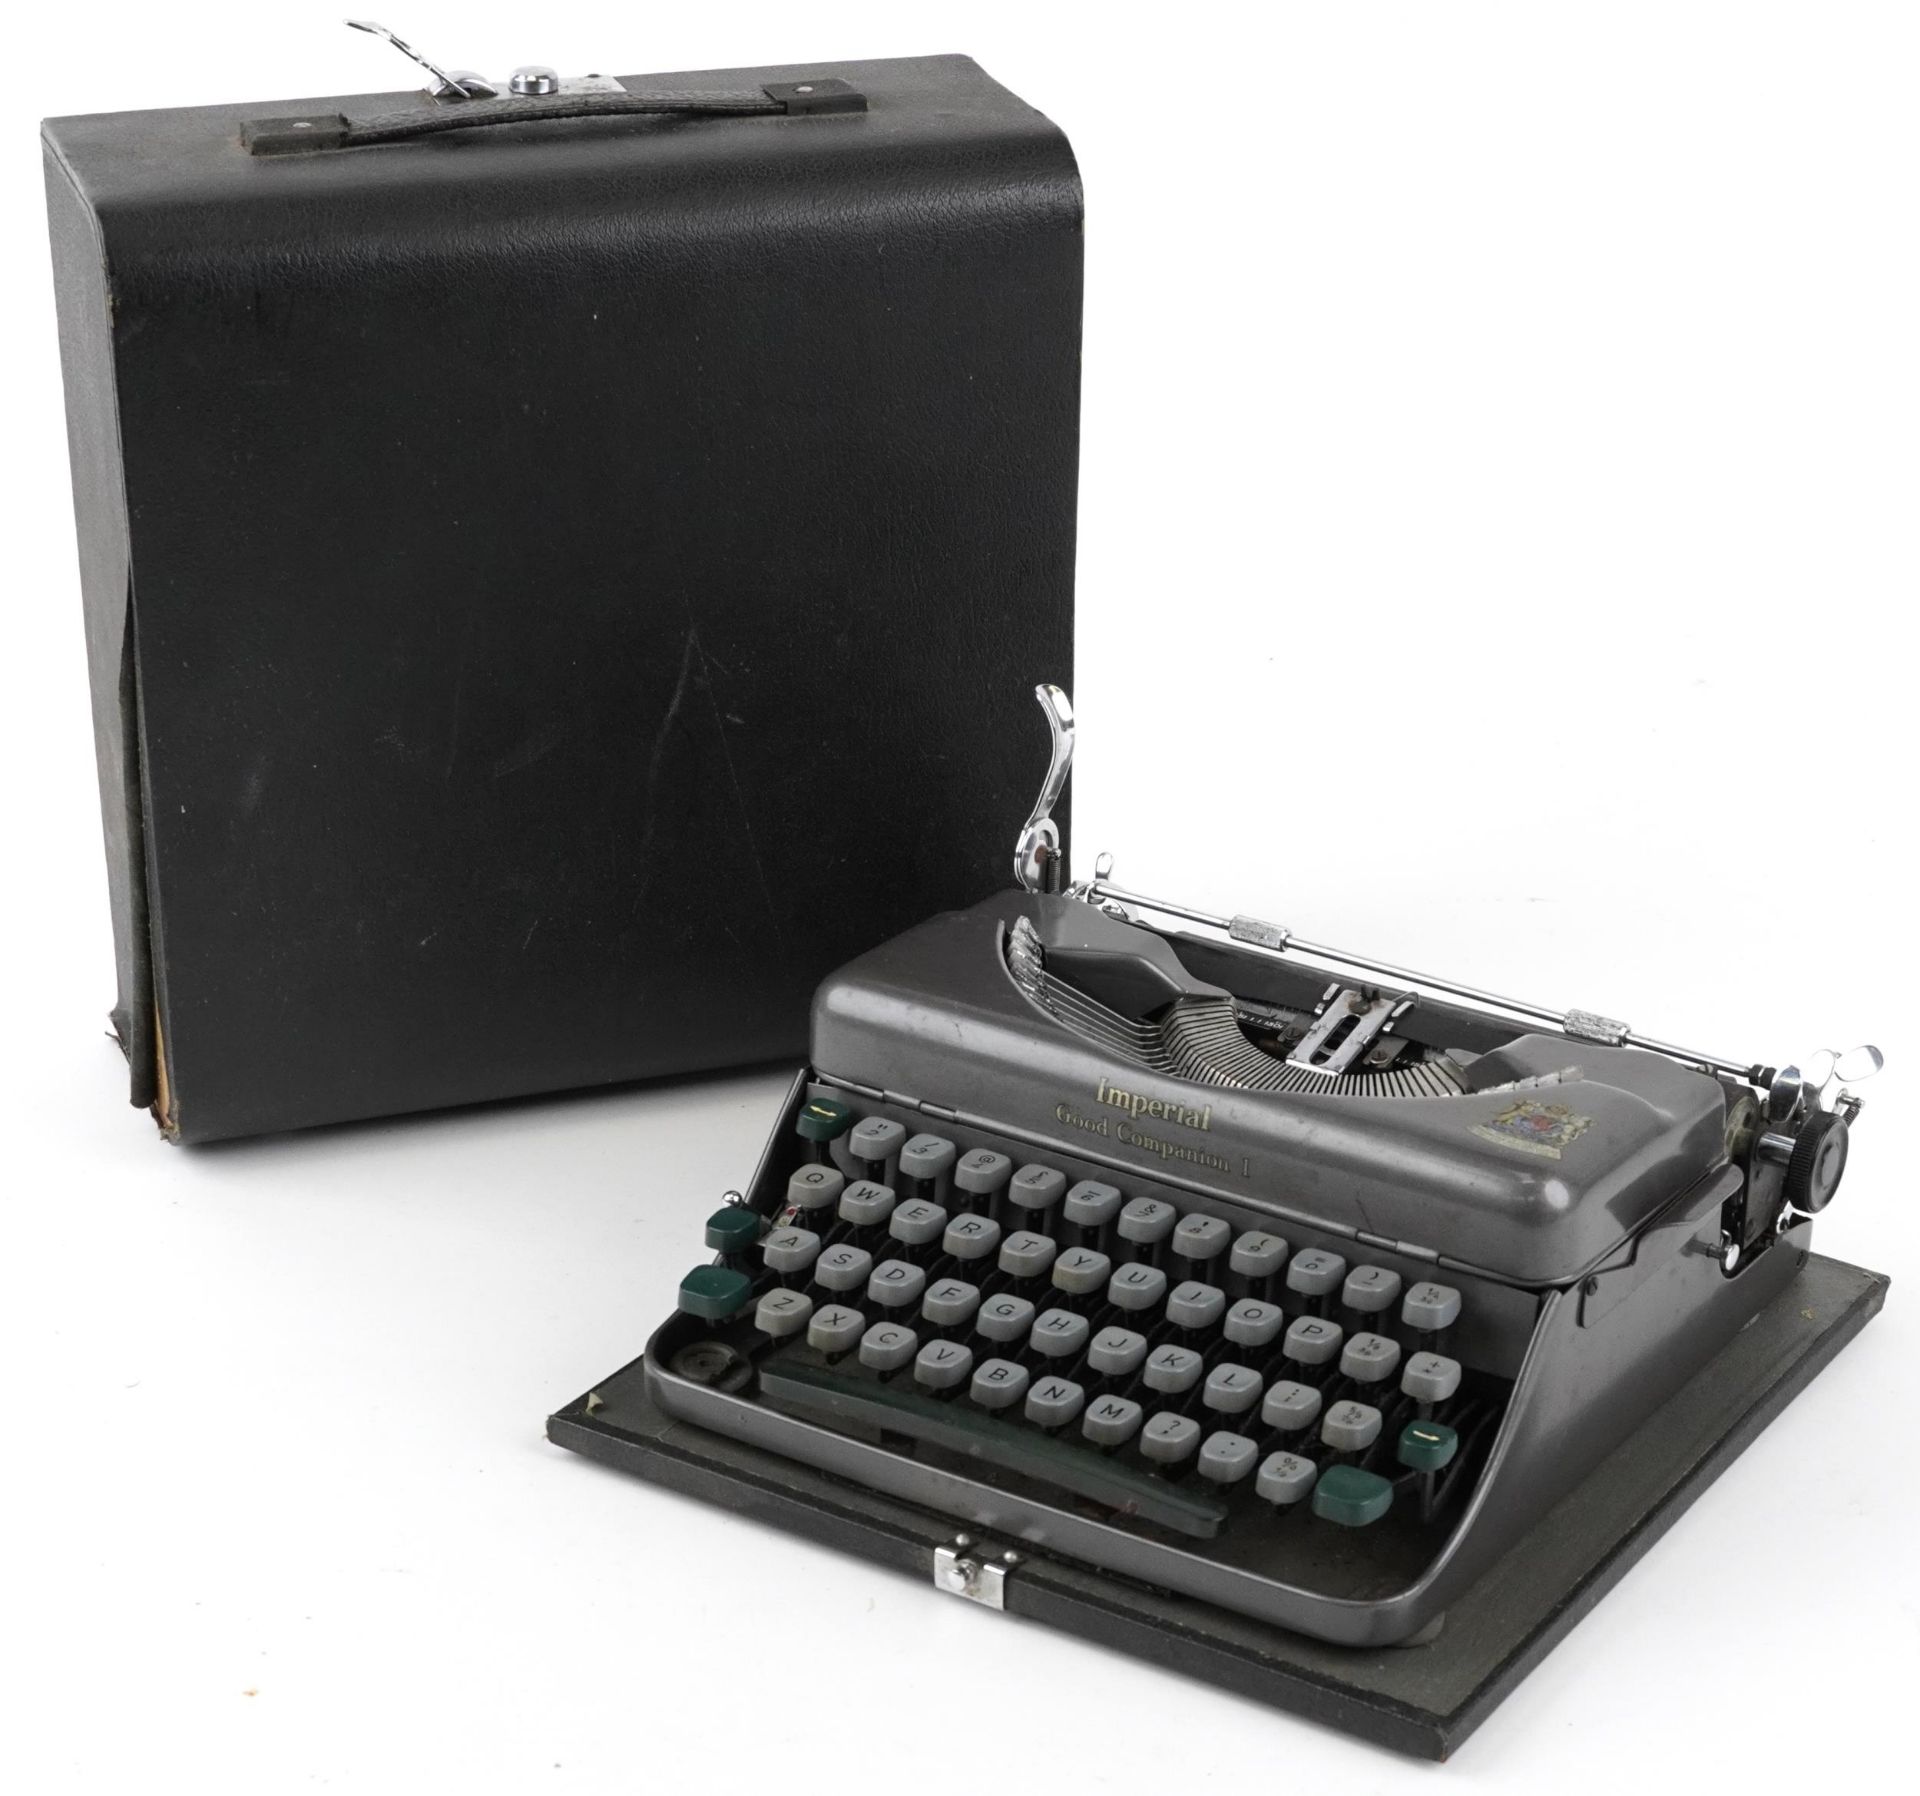 Vintage Imperial typewriter with case : For further information on this lot please visit